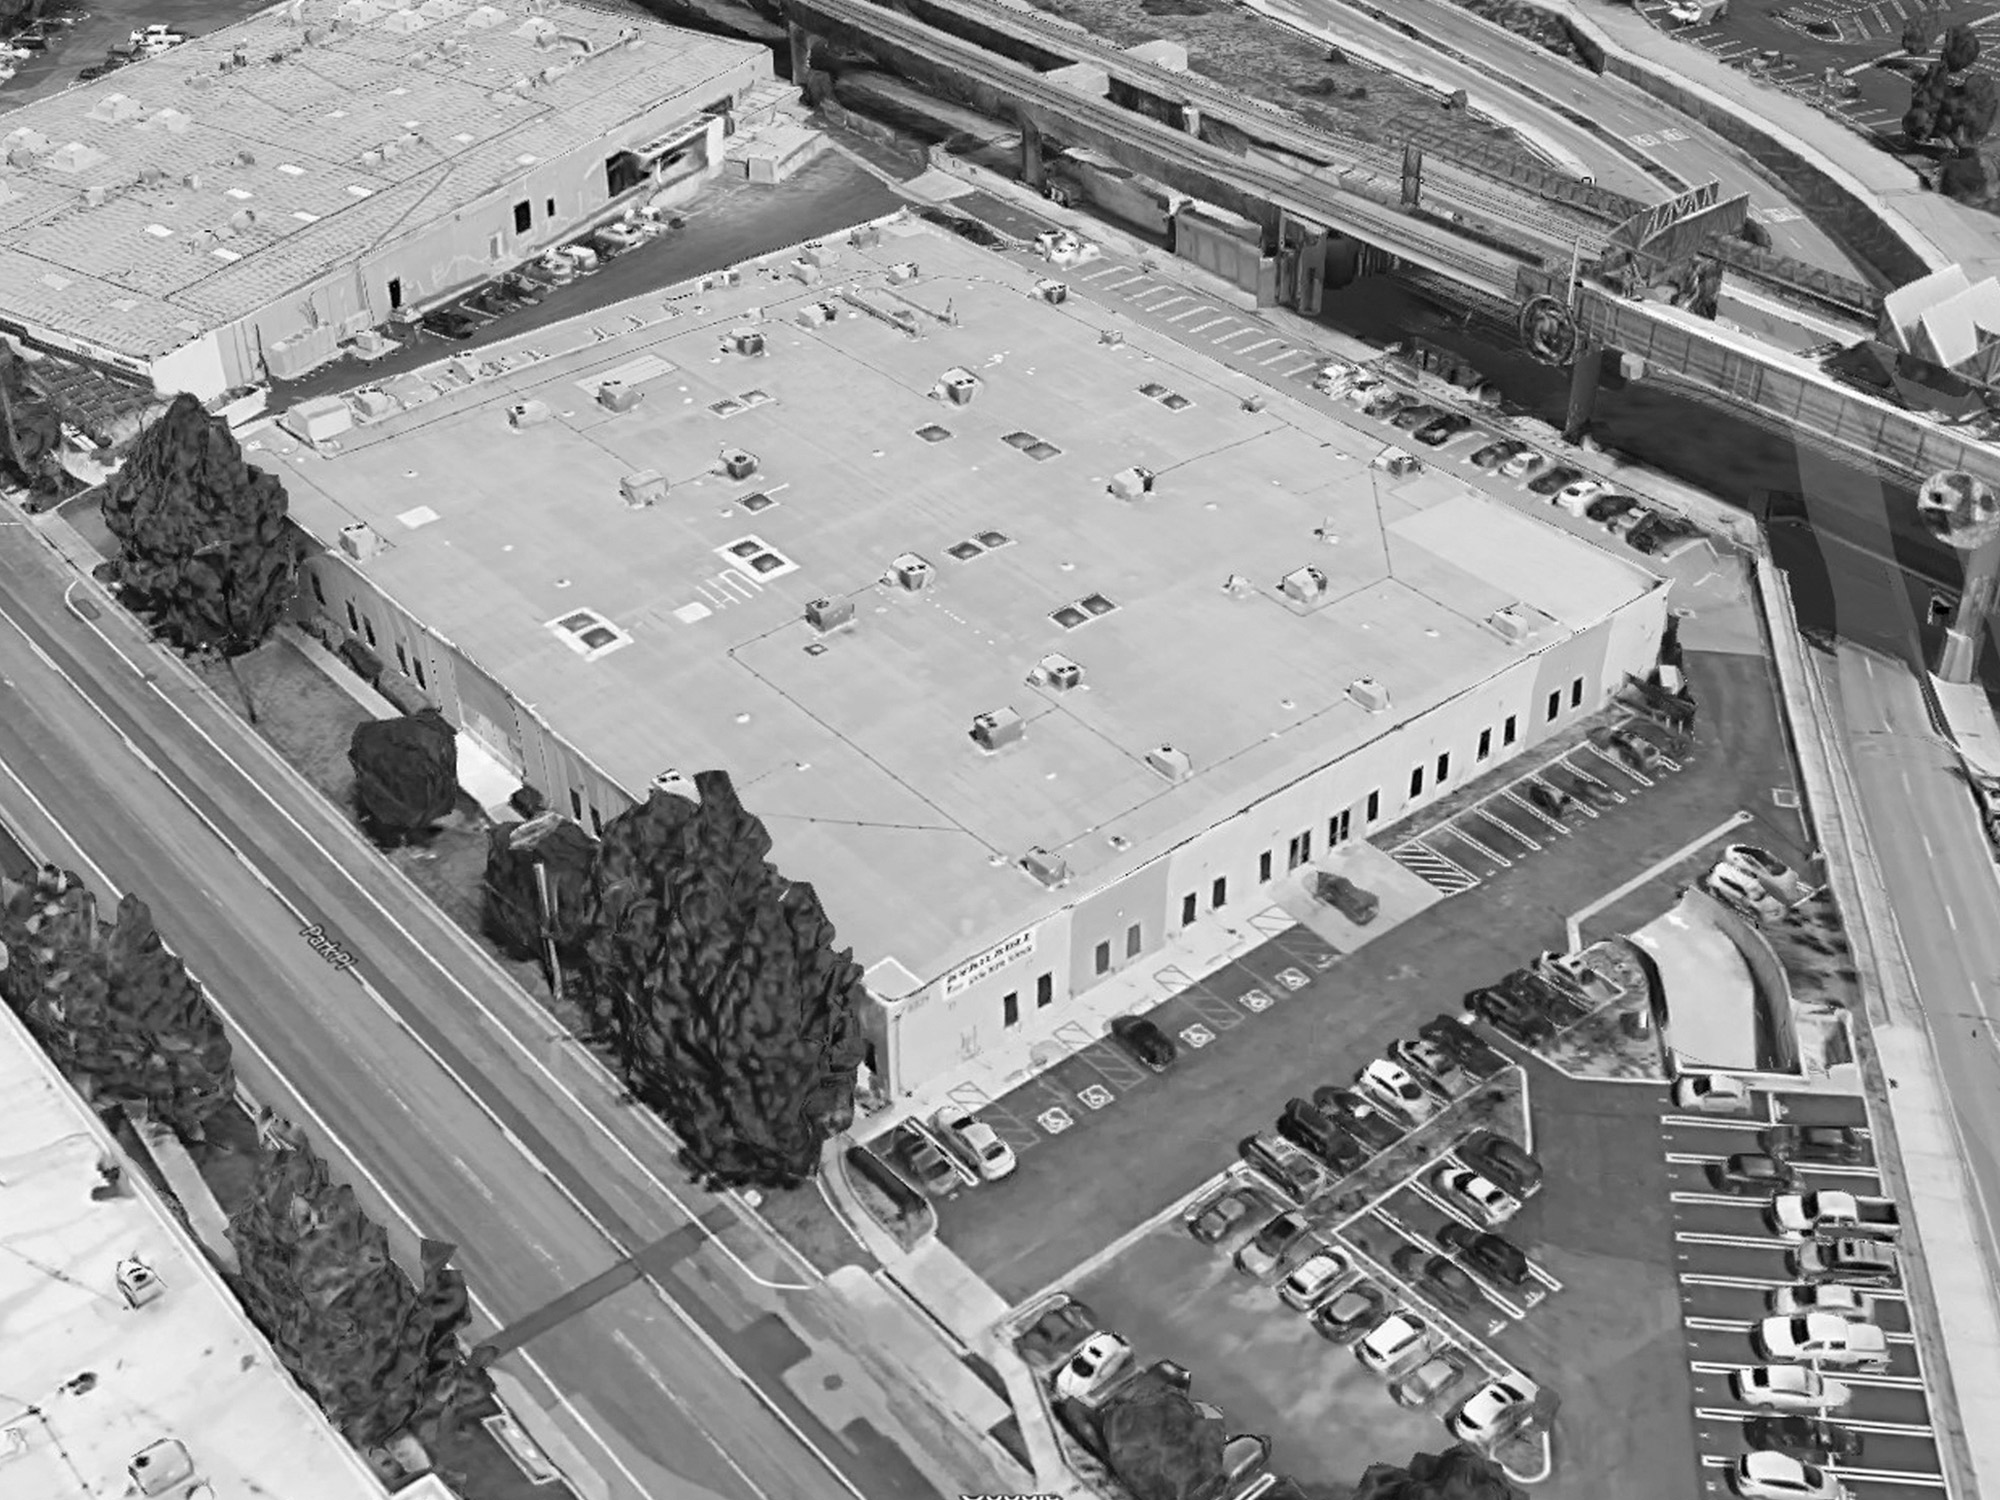 Aerial view of a former warehouse building with an adjacent parking lot.